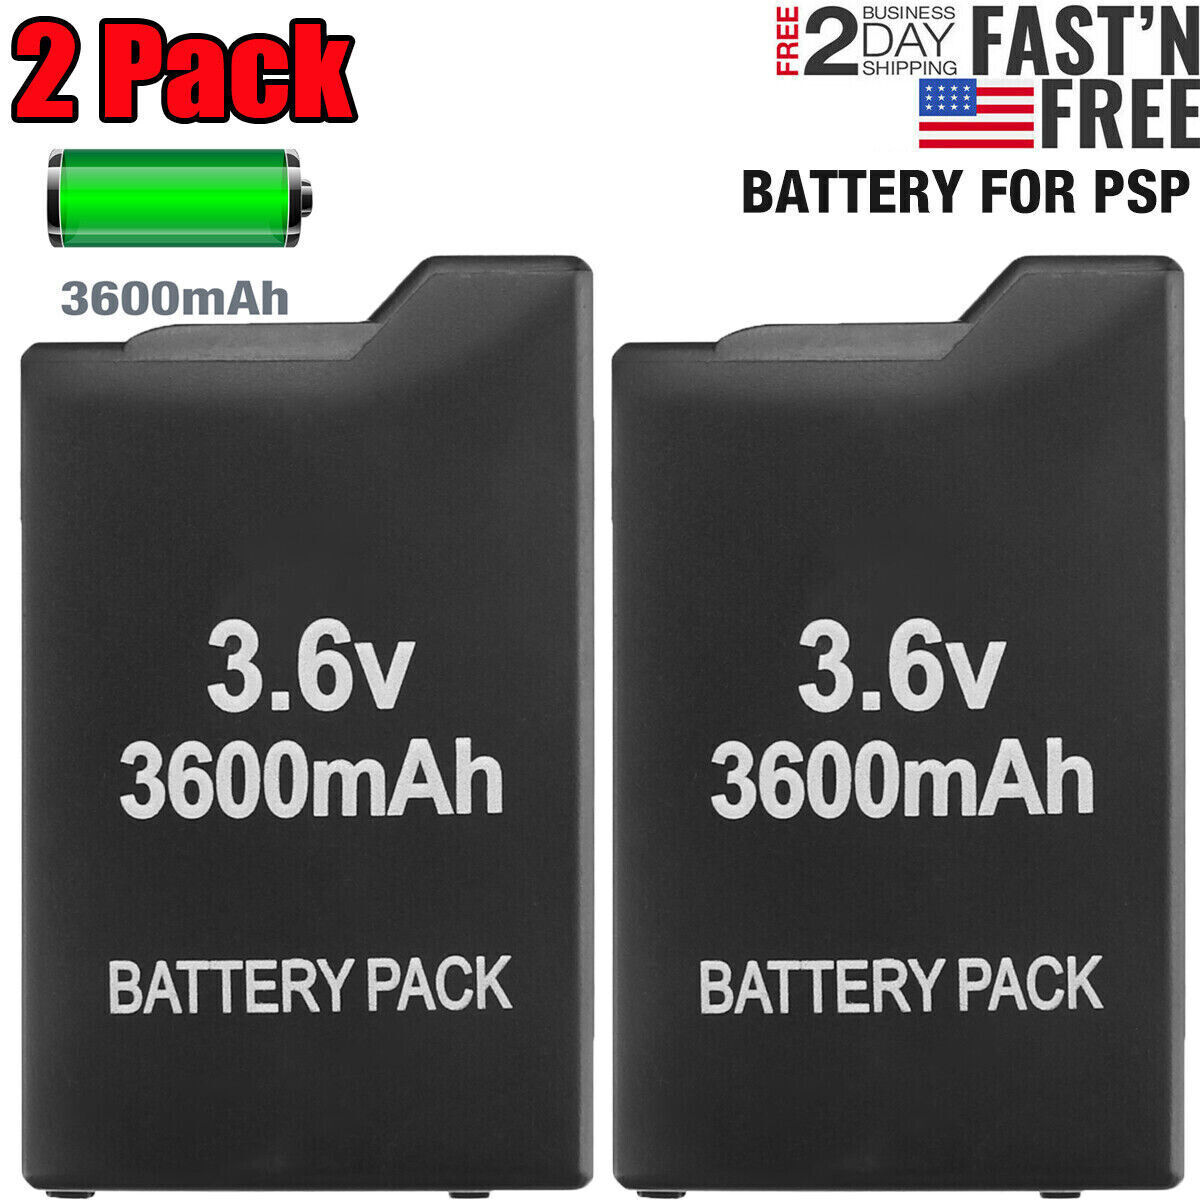 2 Pack 3600mAh Replacement Battery Packs for Sony PSP PSP-1000 1000 1001 USA - $25.99